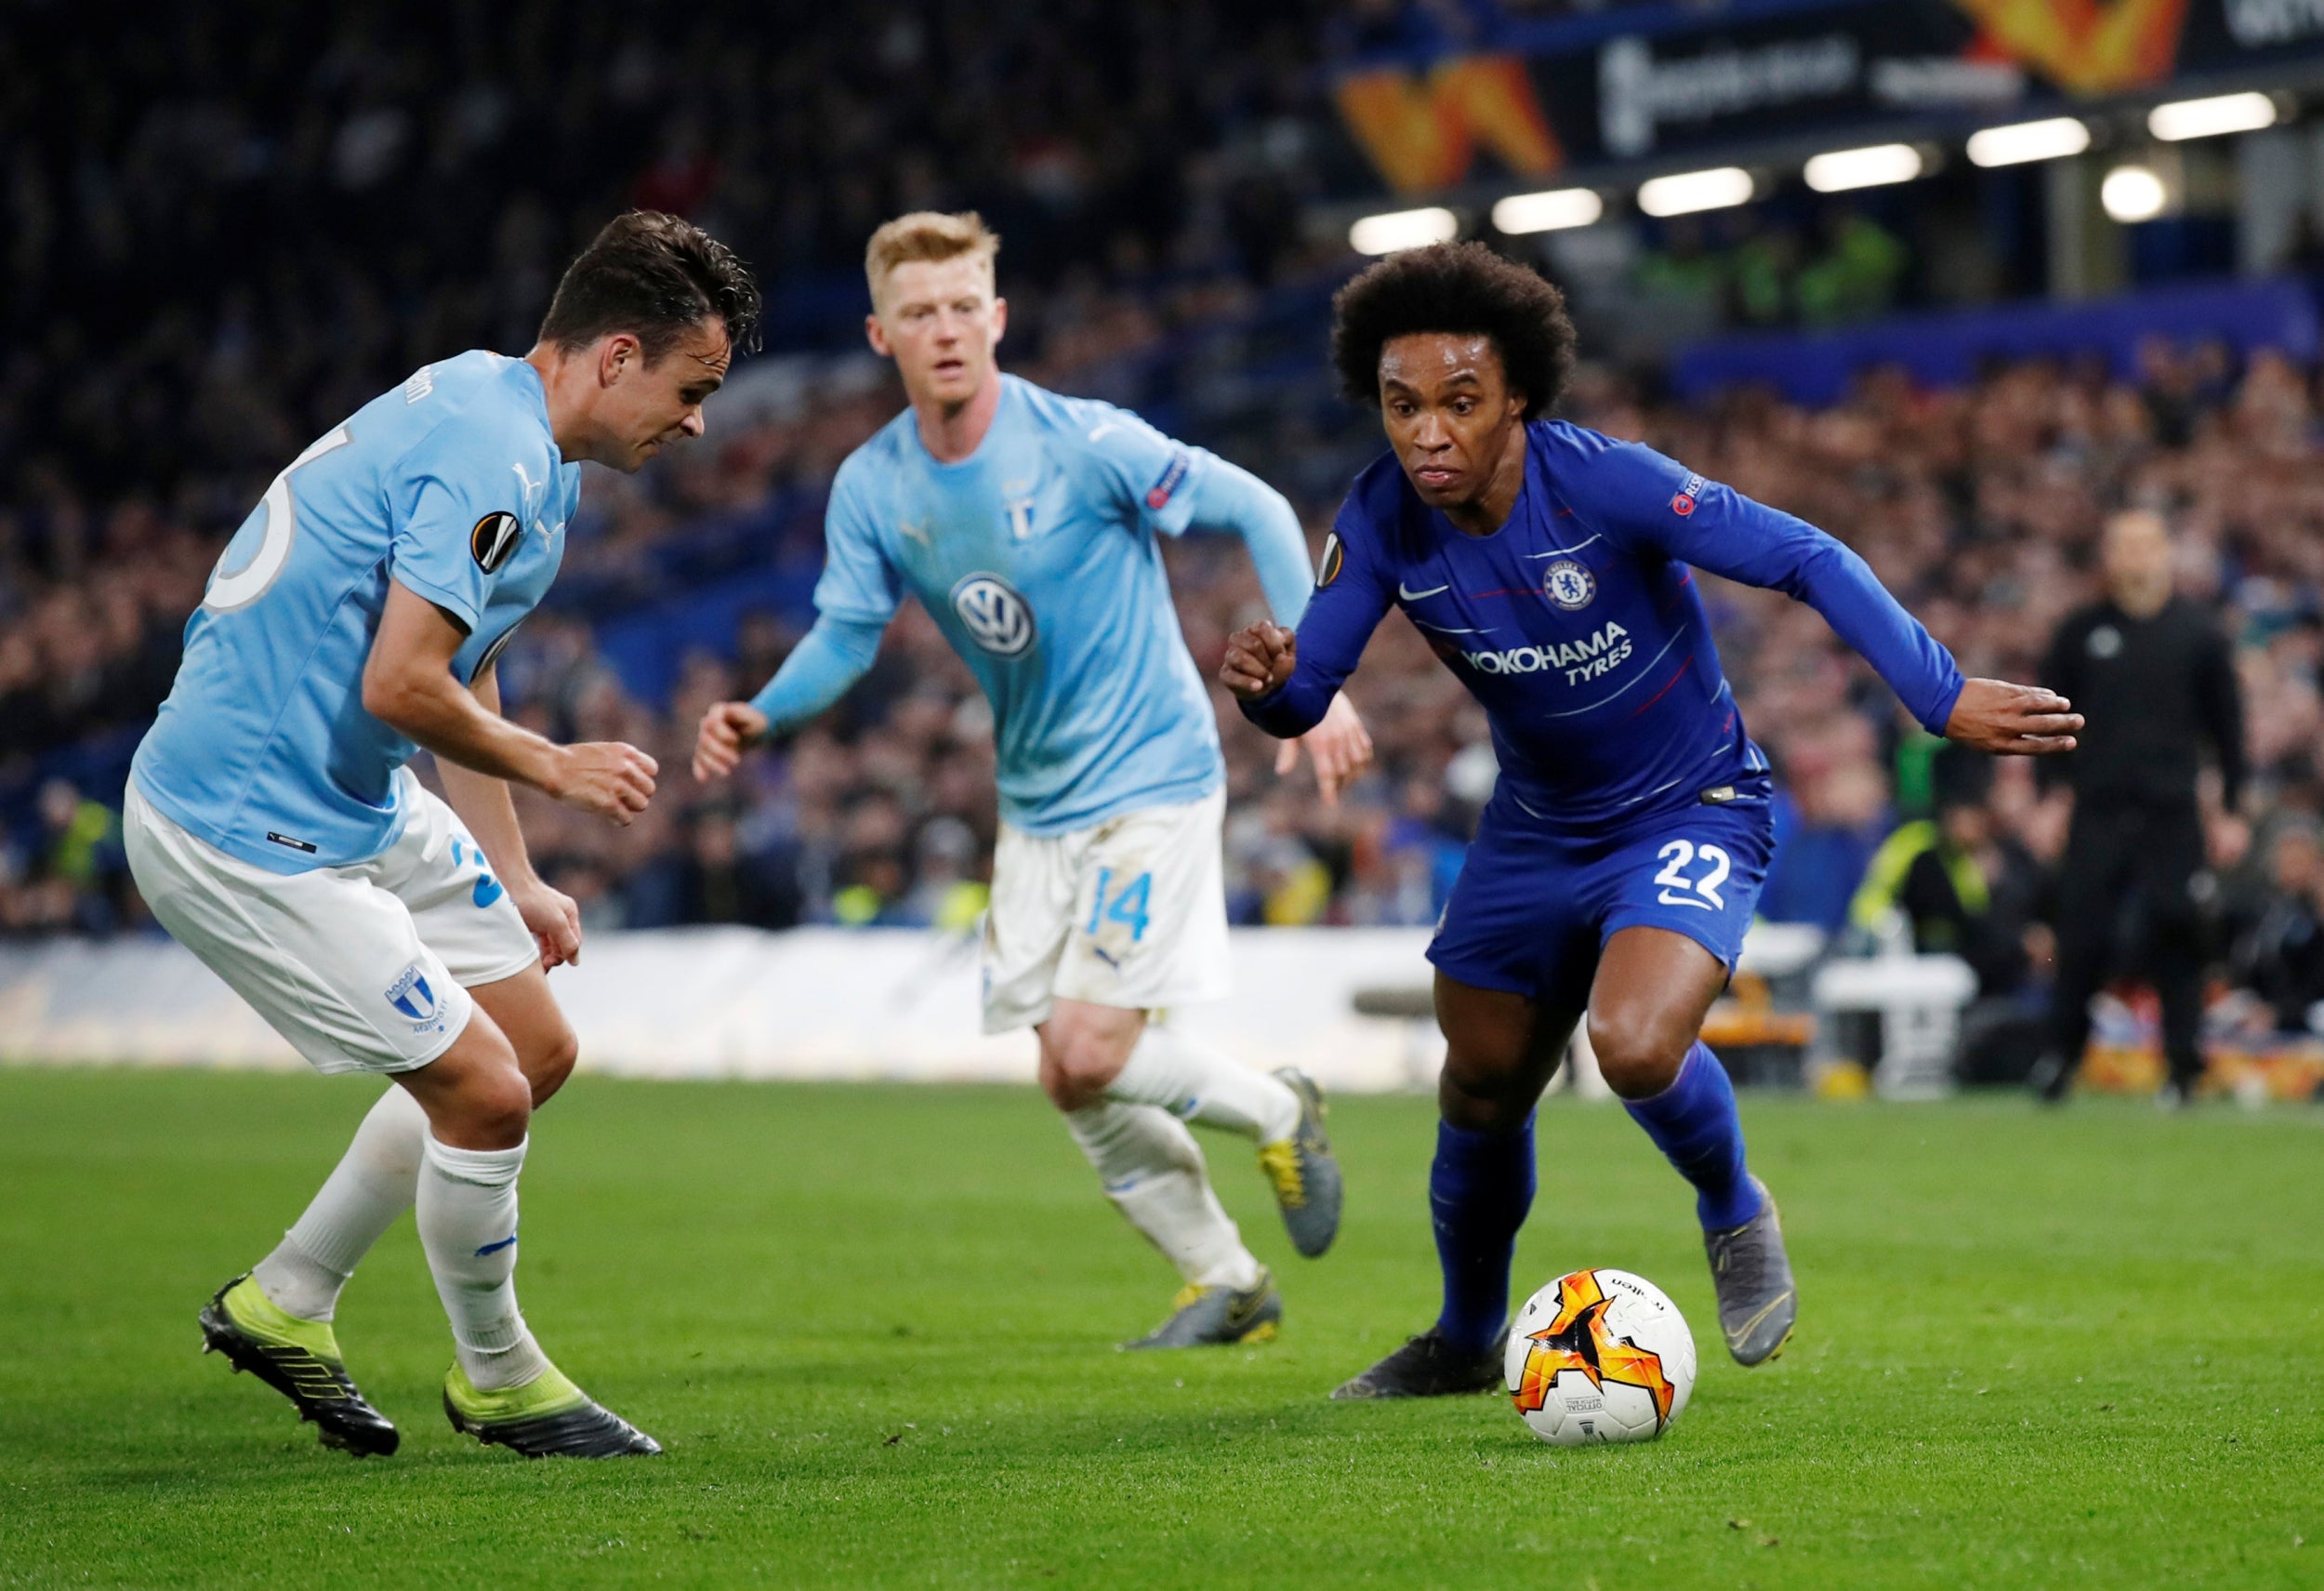 Willian looks to get himself out of a tight situation during the first half